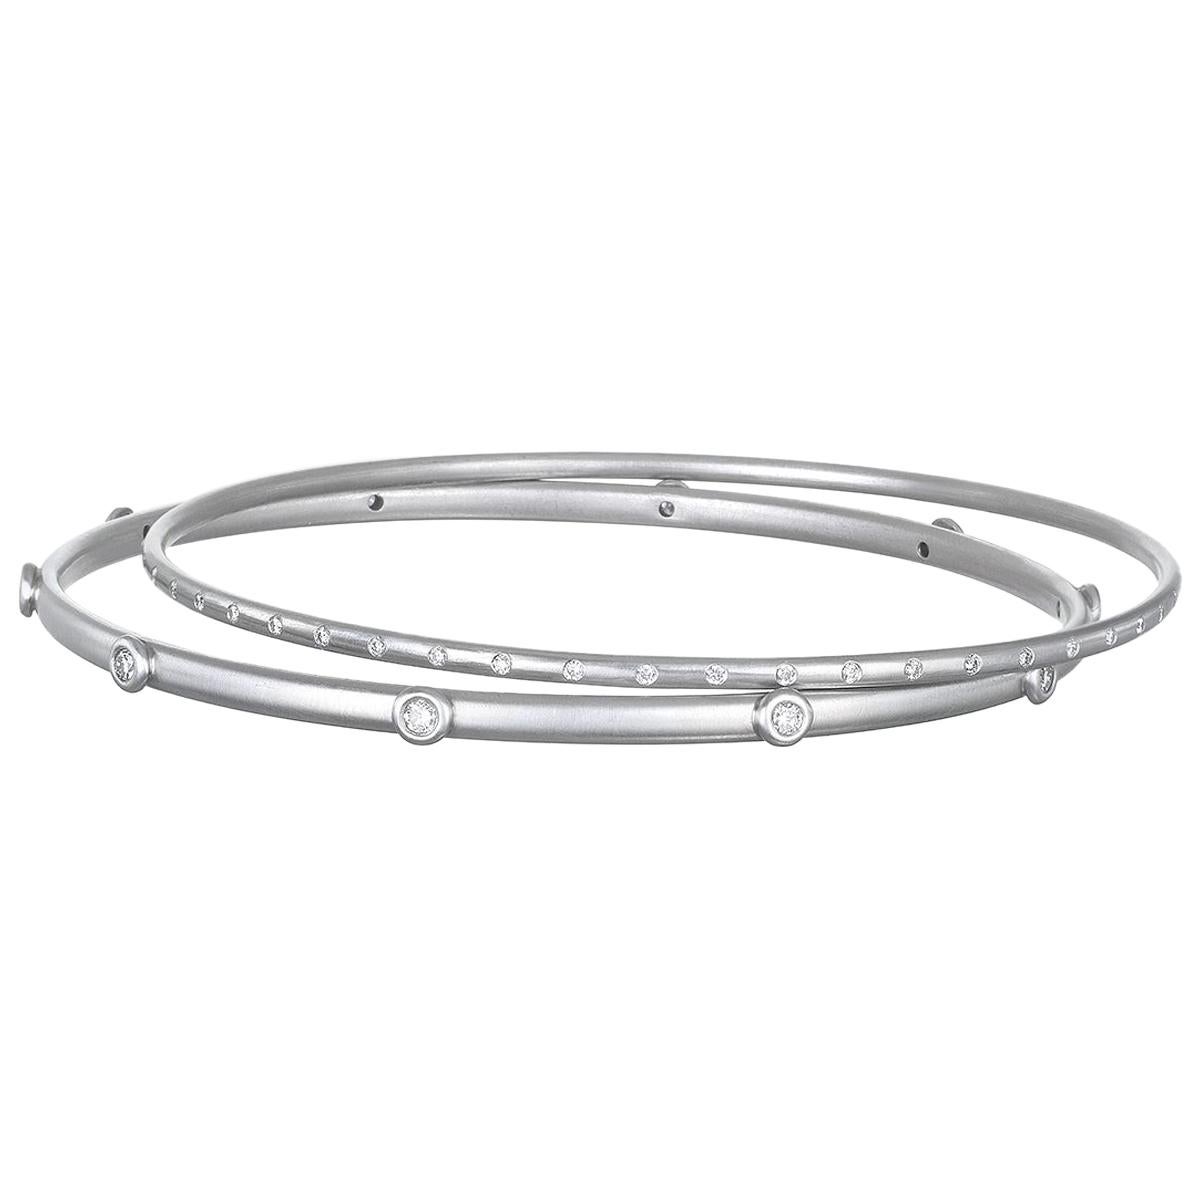 Handcrafted in platinum with delicate diamond detail, this gypsy set diamond bangle is beautifully sleek.
Wear alone or complete the look with a variety of shapes and textures. Each sold individually.

50 Diamonds = .4 cts twt
Inner diameter 2.5